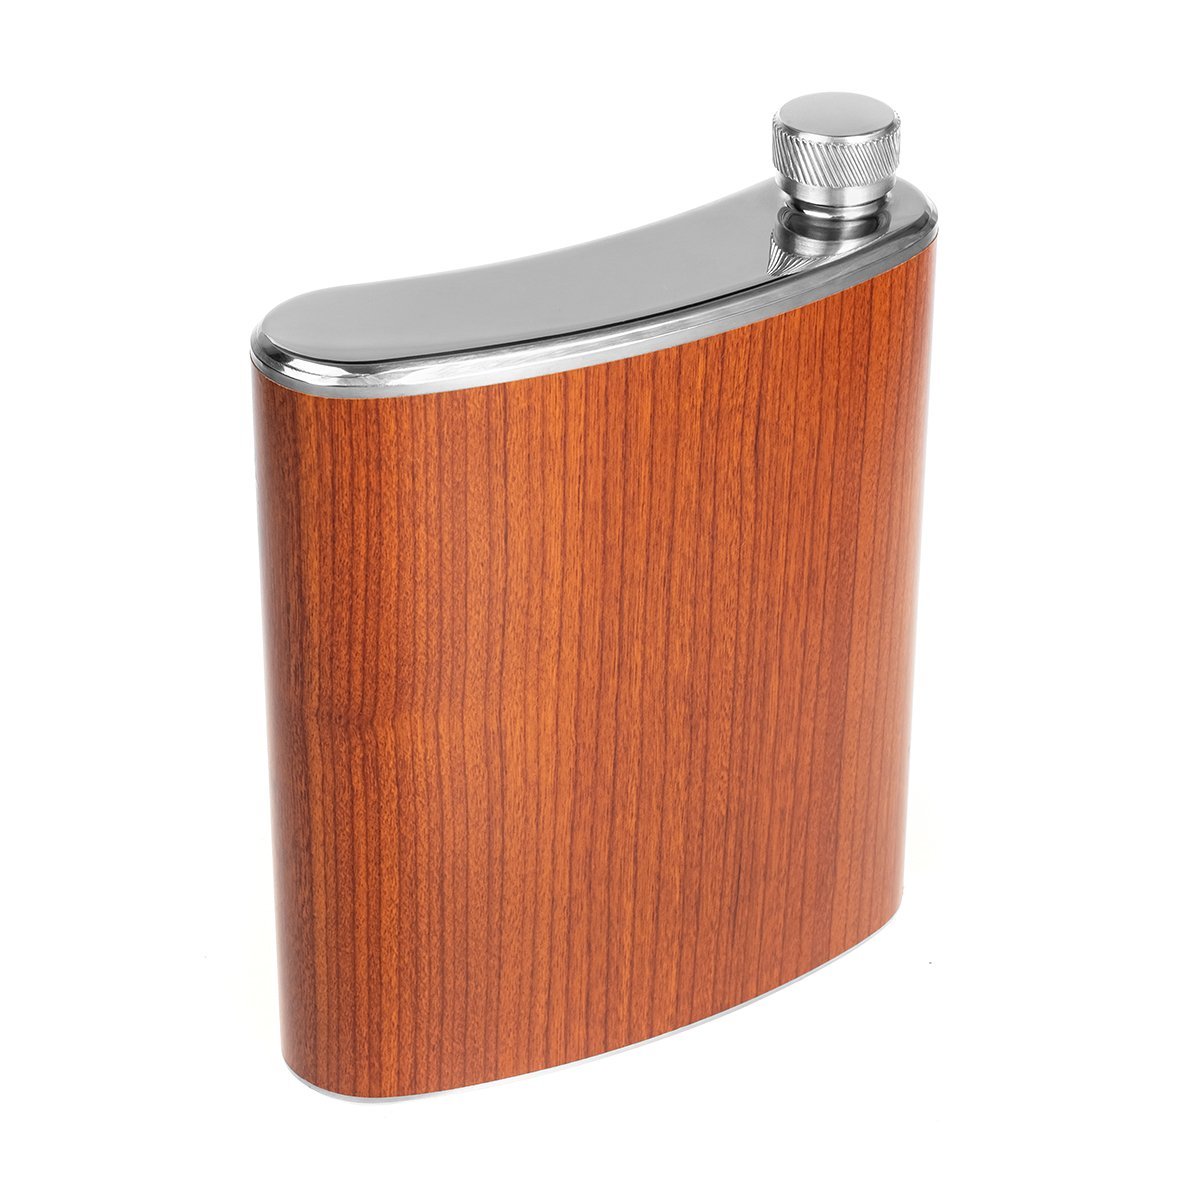 Stainless Steel Hip Alcohol Flask with Shot Glasses in Case 17 oz